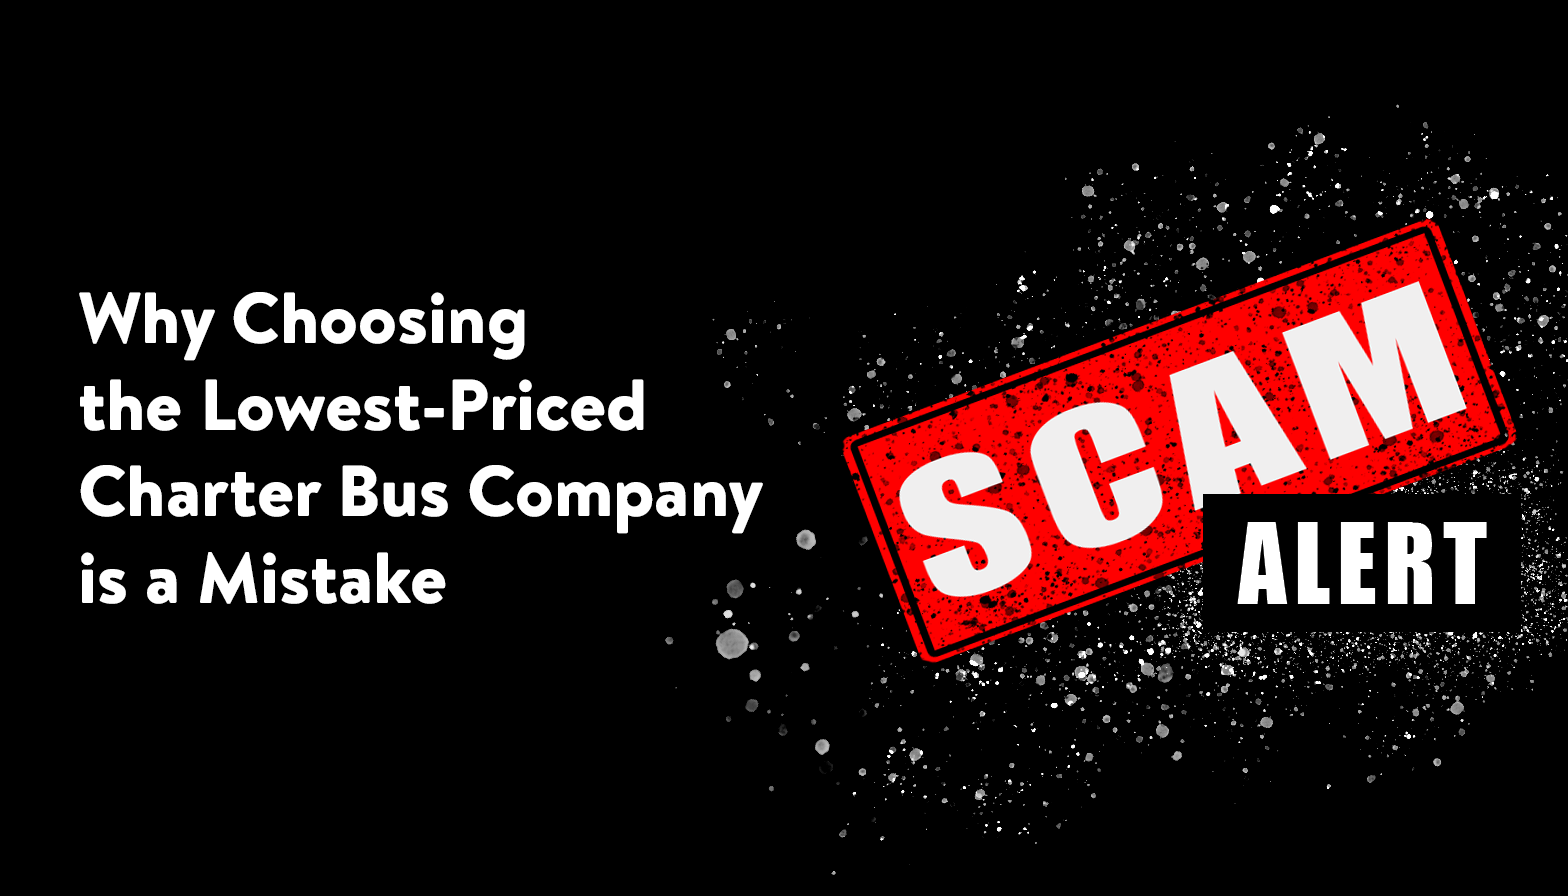 Why Choosing the Lowest-Priced Charter Bus Company is a Mistake